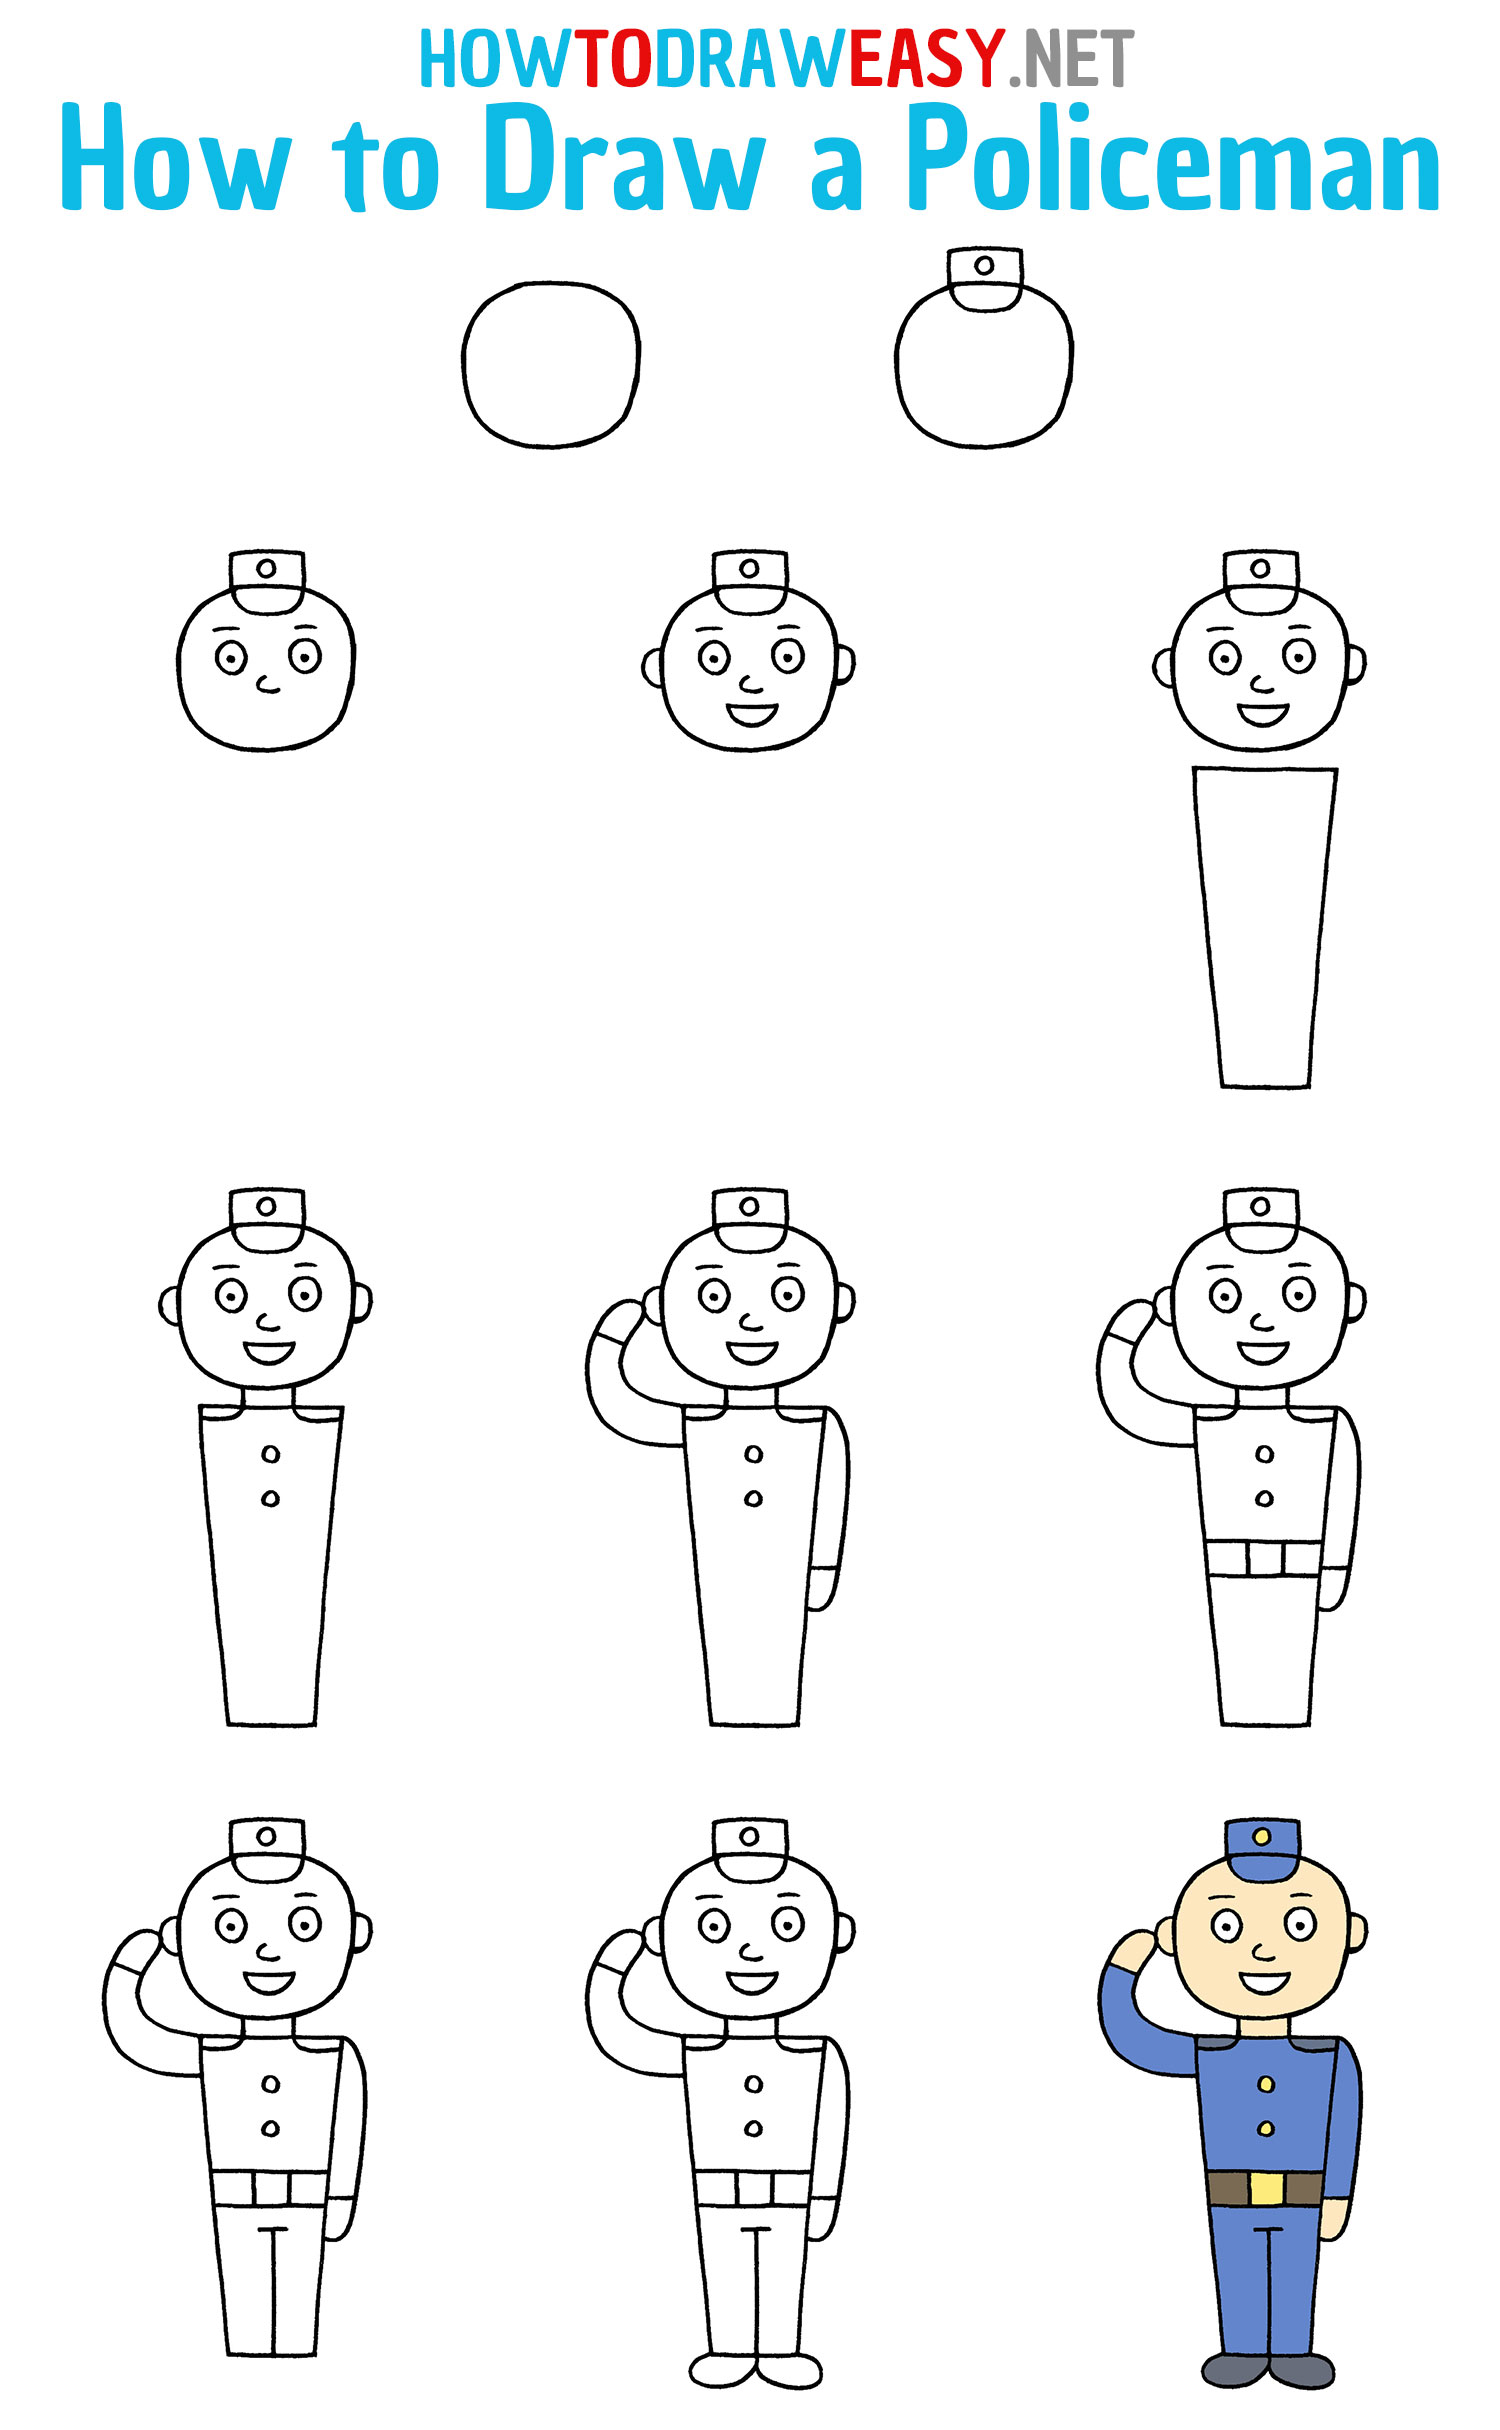 How to Draw a Policeman Step by Step